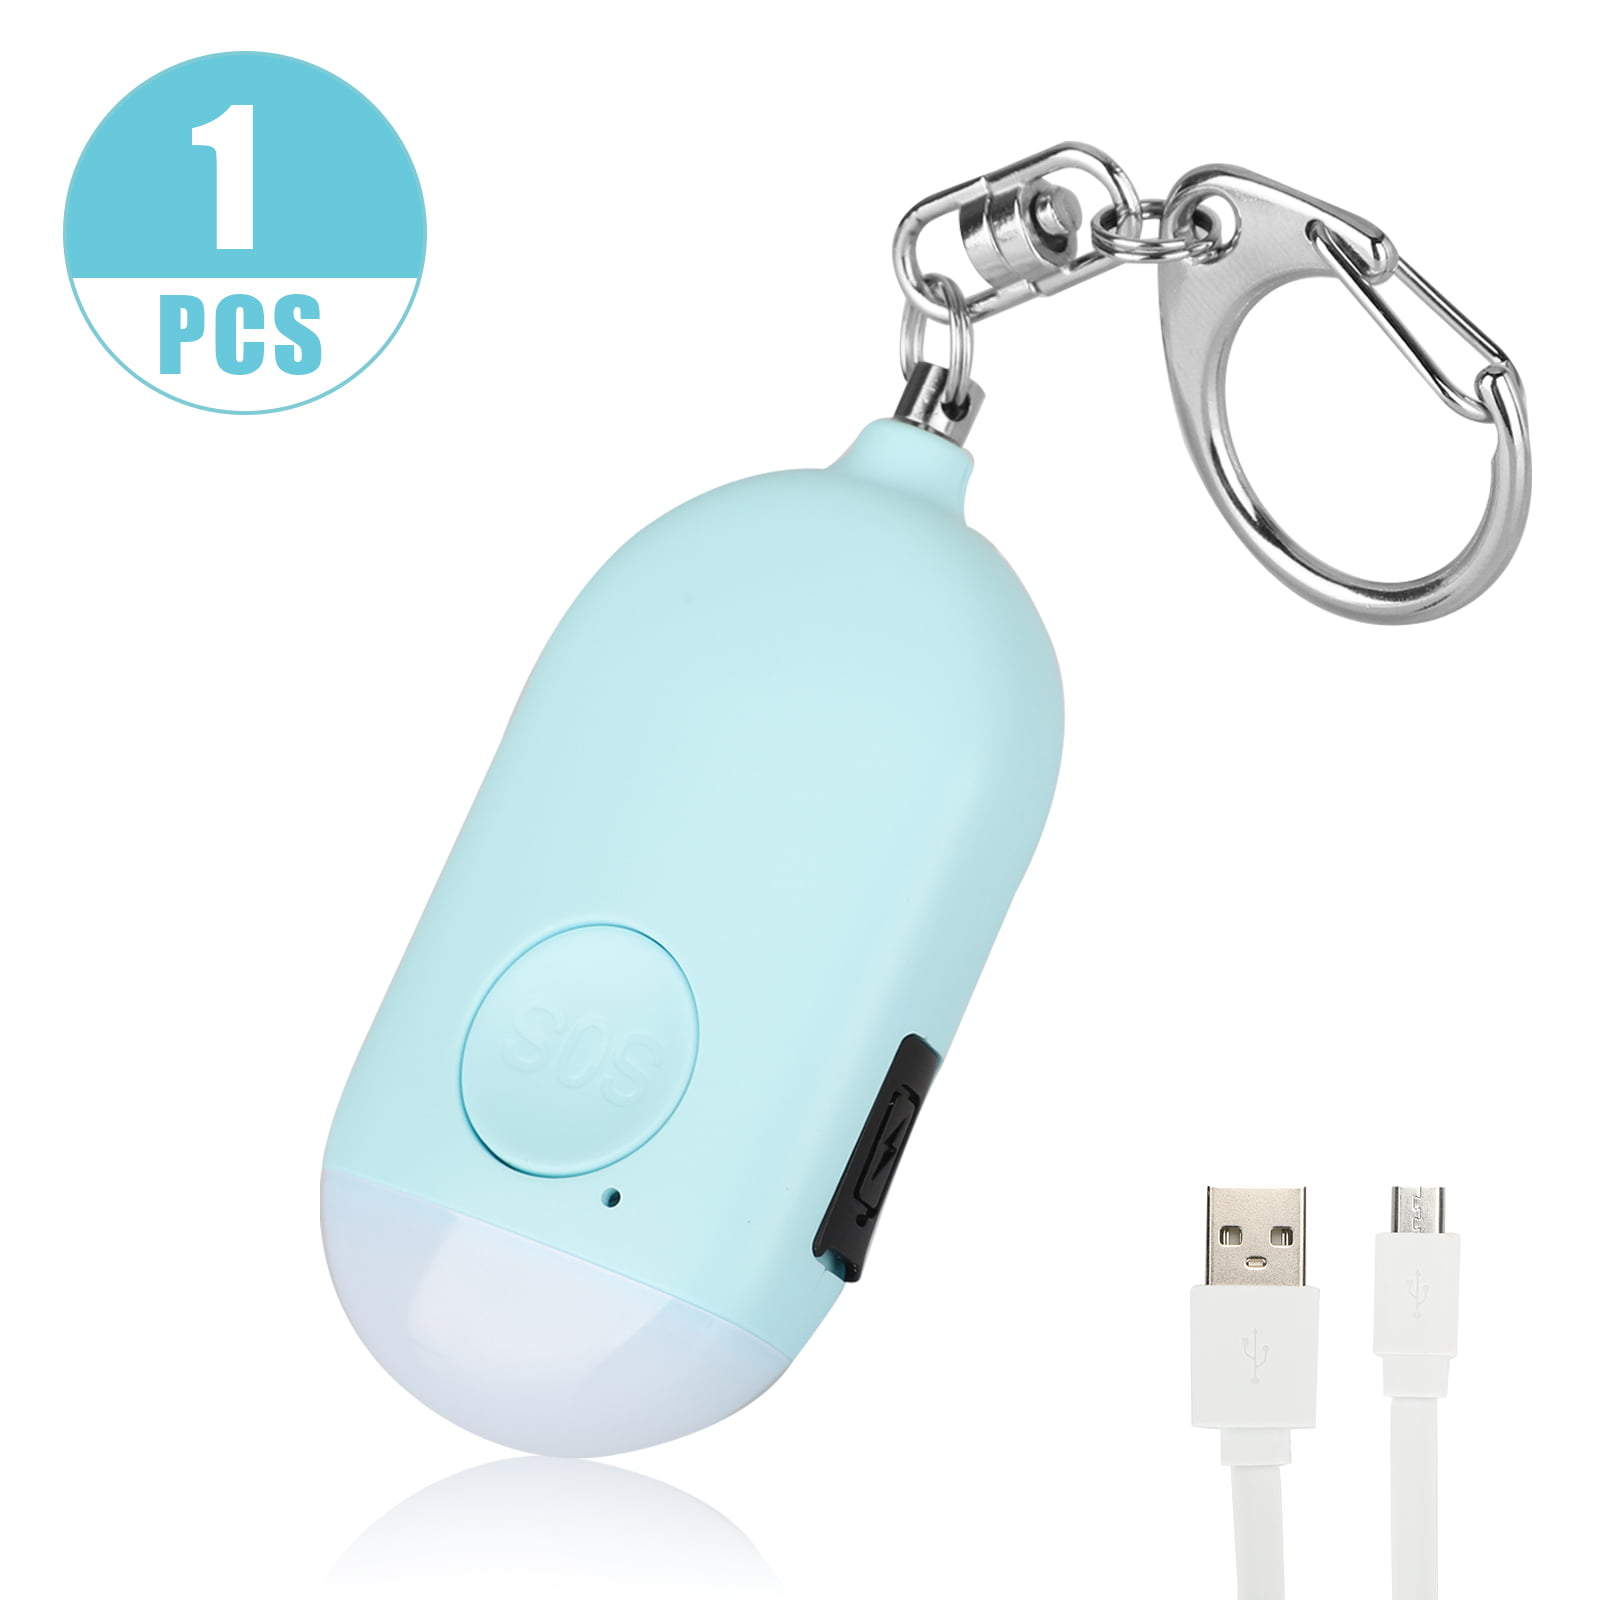 Emergency Personal Alarm for Women Men Children Elderly Security Sound Whistle Safety Siren Safe Sound Personal Alarm 140DB Self-Defense Electronic Device Alarm Keychain with LED Light 4 Packs